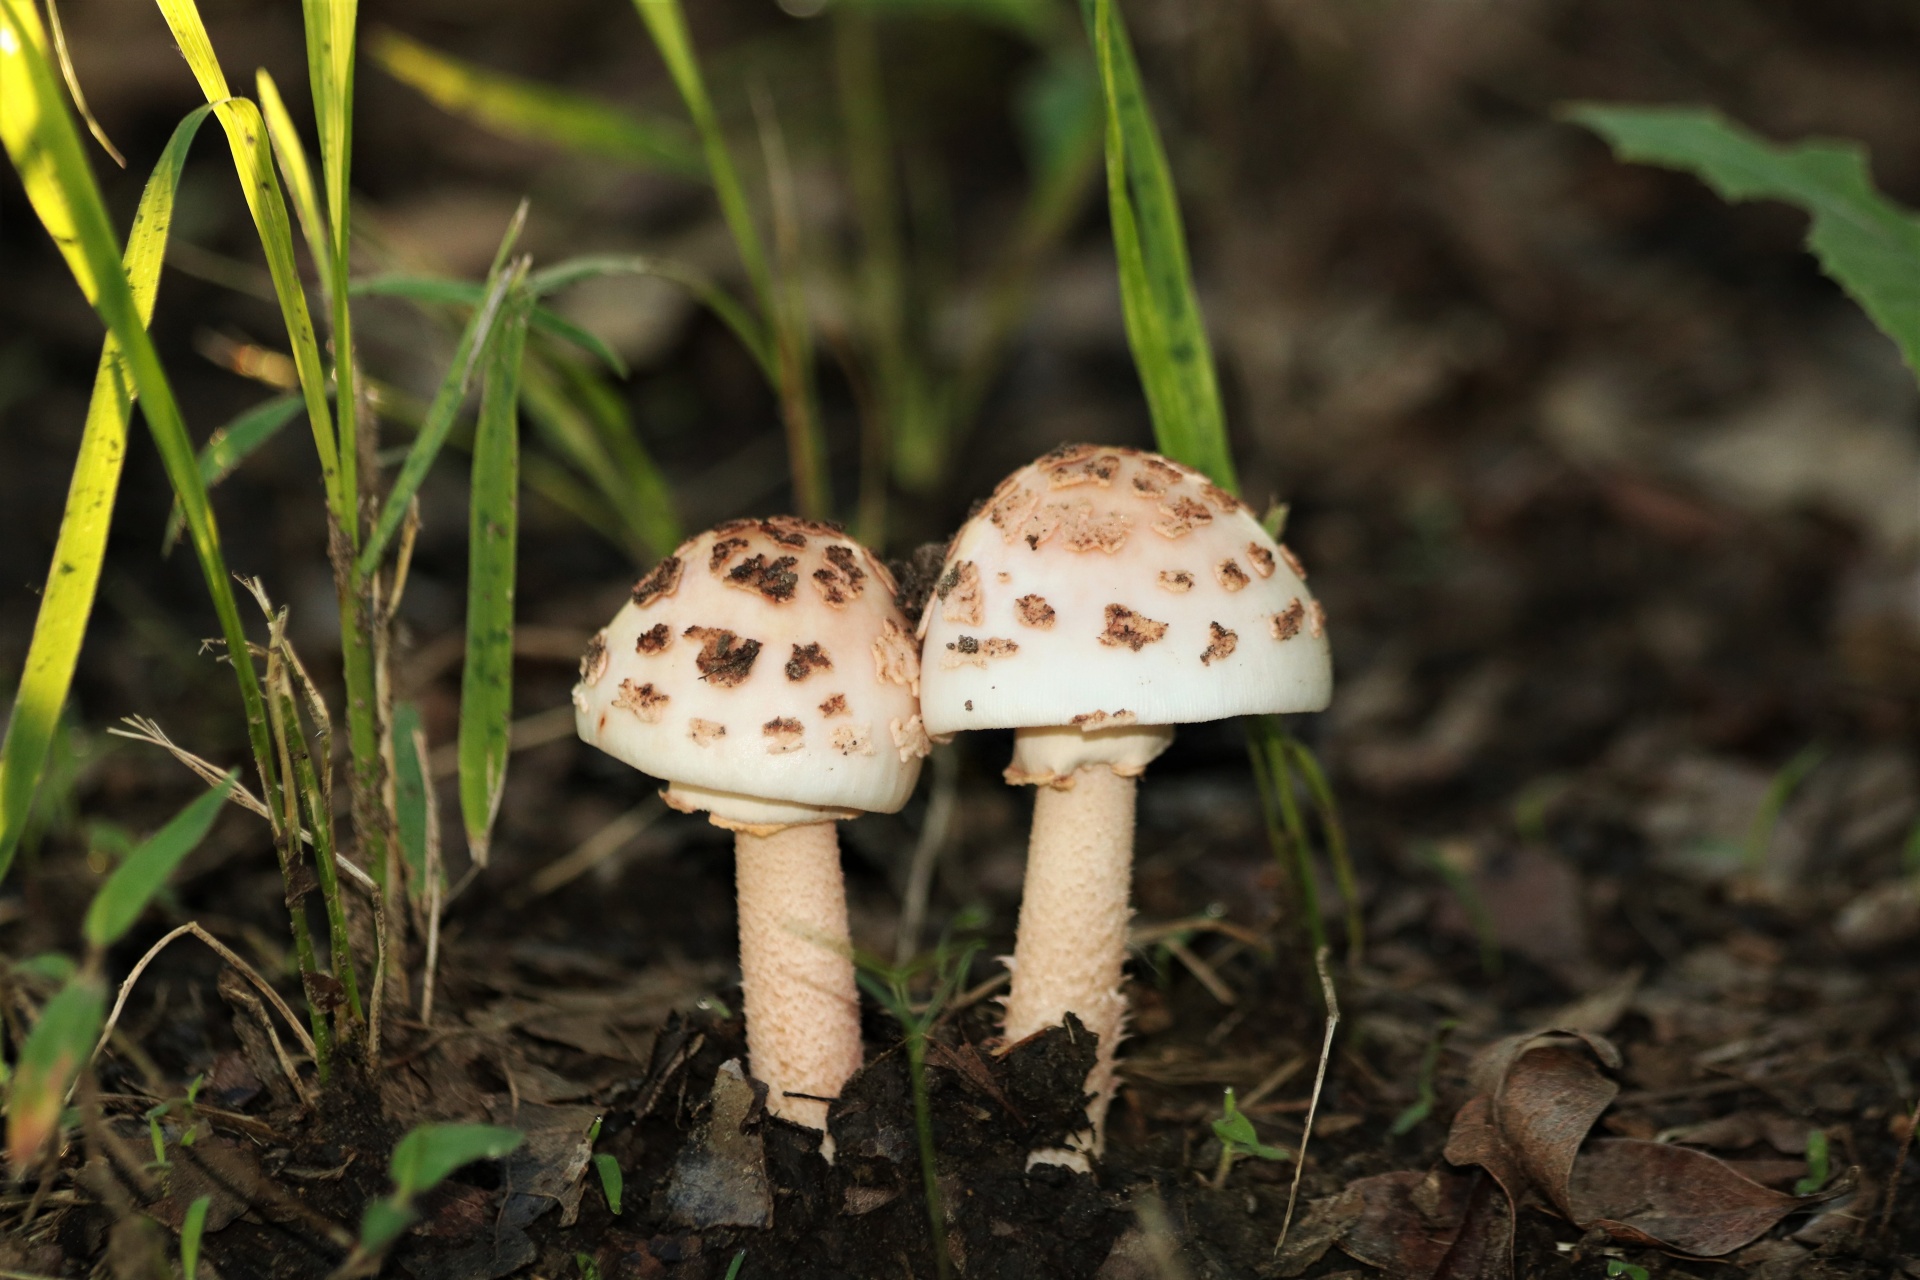 Close-up of two little Amanita blusher mushrooms growing in brown leaves and grass.